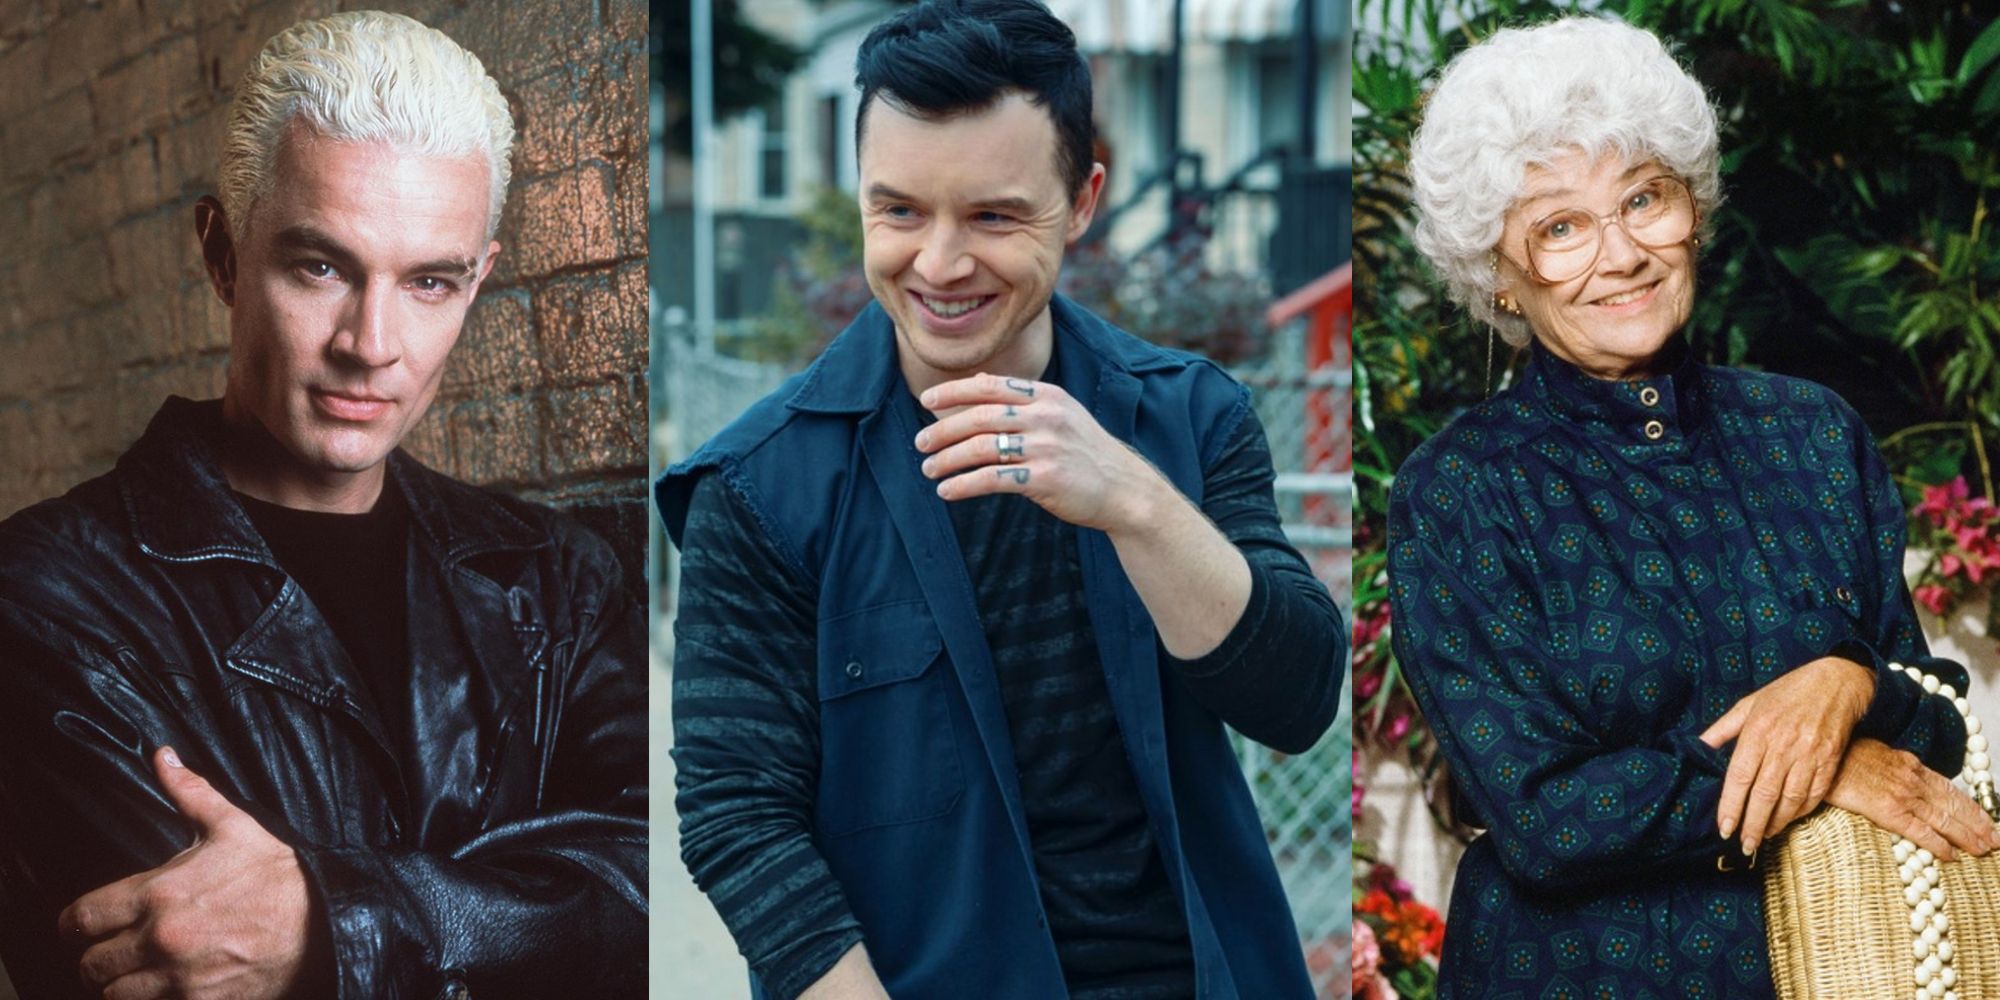 James Marsters, Noel Fisher, and Estelle Getty